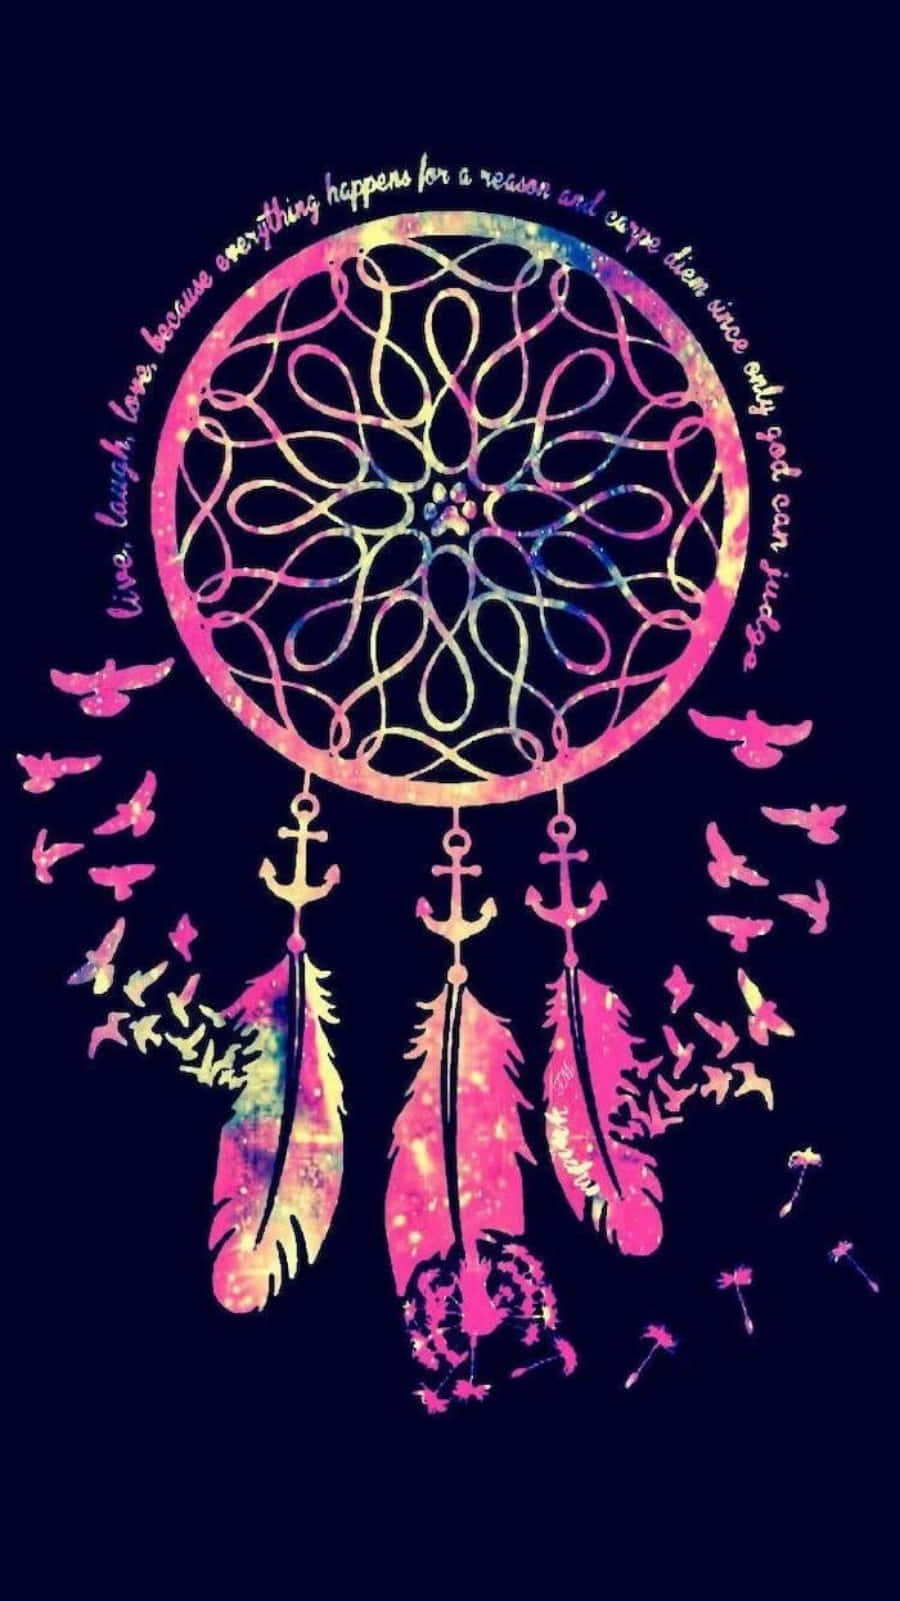 A dreamcatcher with colorful feathers and words - Colorful